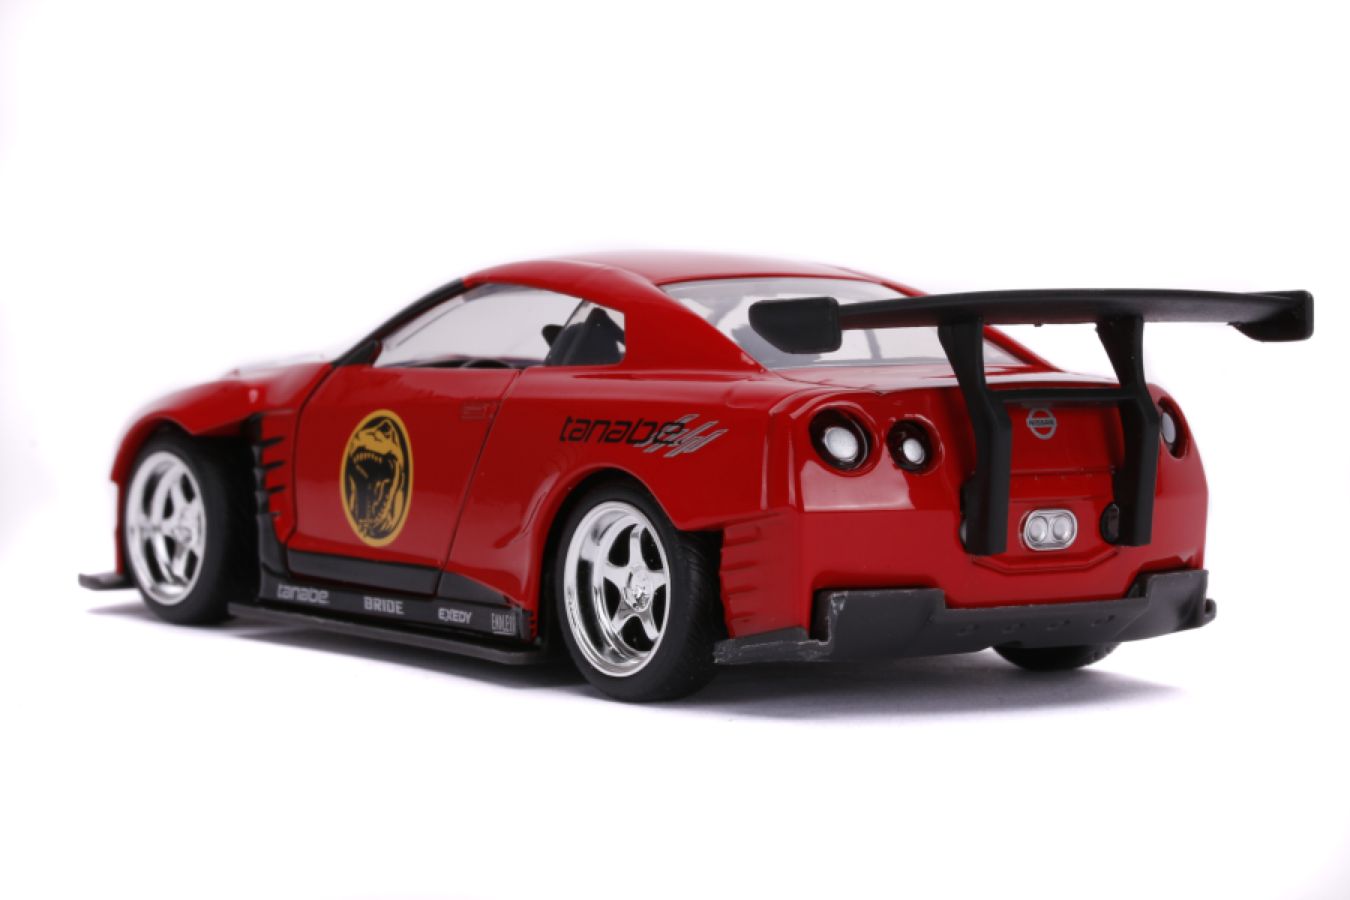 Power Rangers - '09 Nissan GT-R Red 1:32 Scale Hollywood Ride